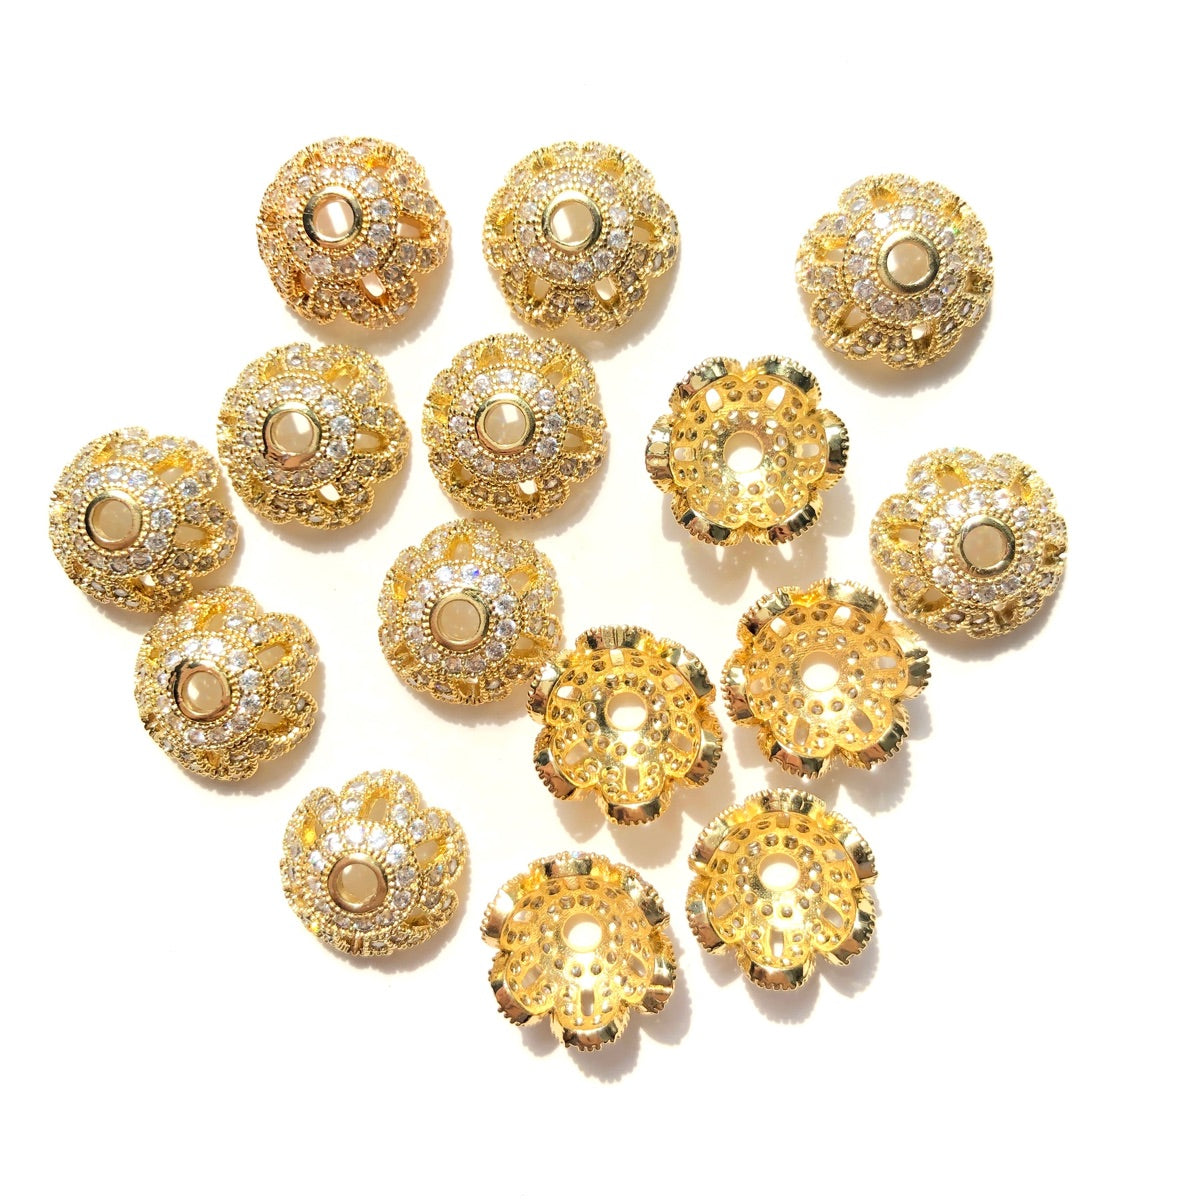 10-20pcs/lot 12mm CZ Paved Beads Caps Flower Spacers CZ Paved Spacers Beads Caps New Spacers Arrivals Wholesale Charms Beads Beyond